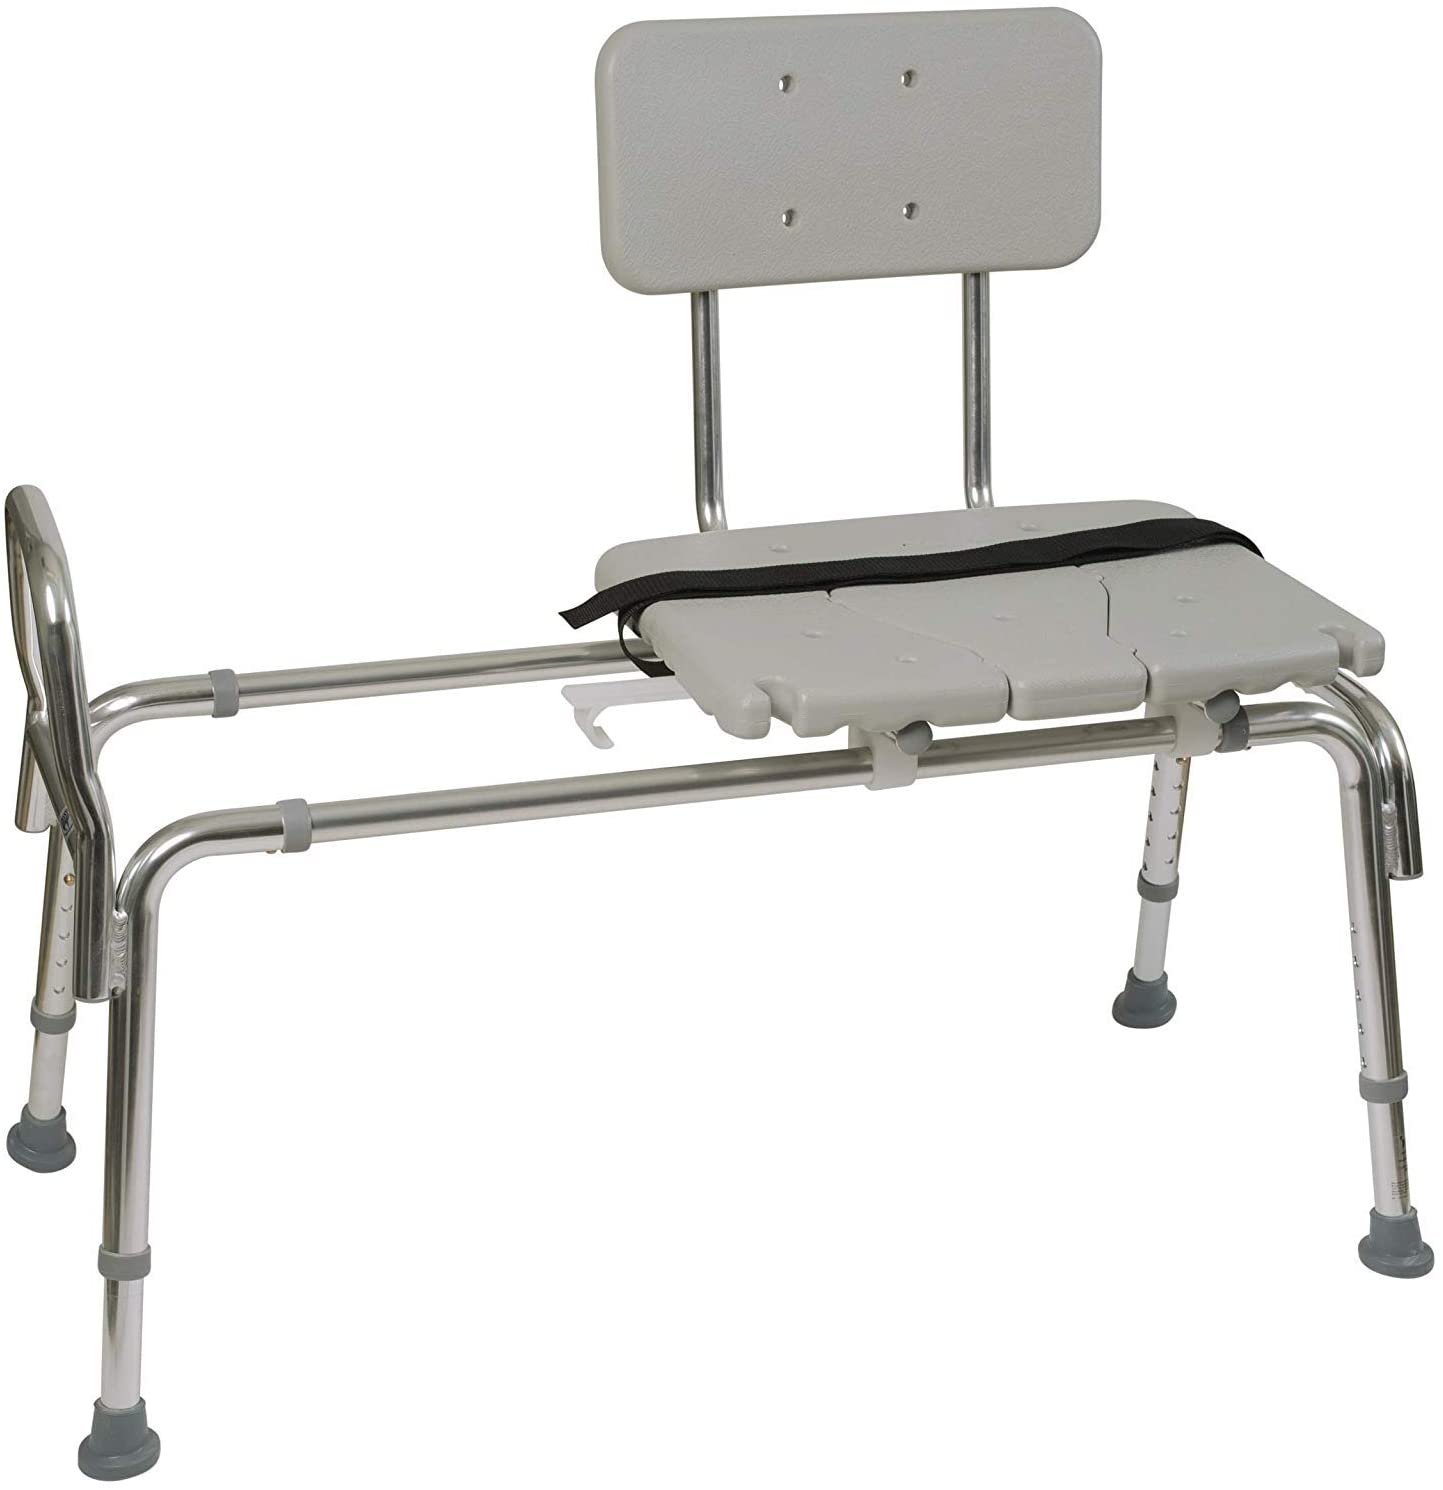 Duro-Med Tub Transfer Bench and Sliding Shower Chair